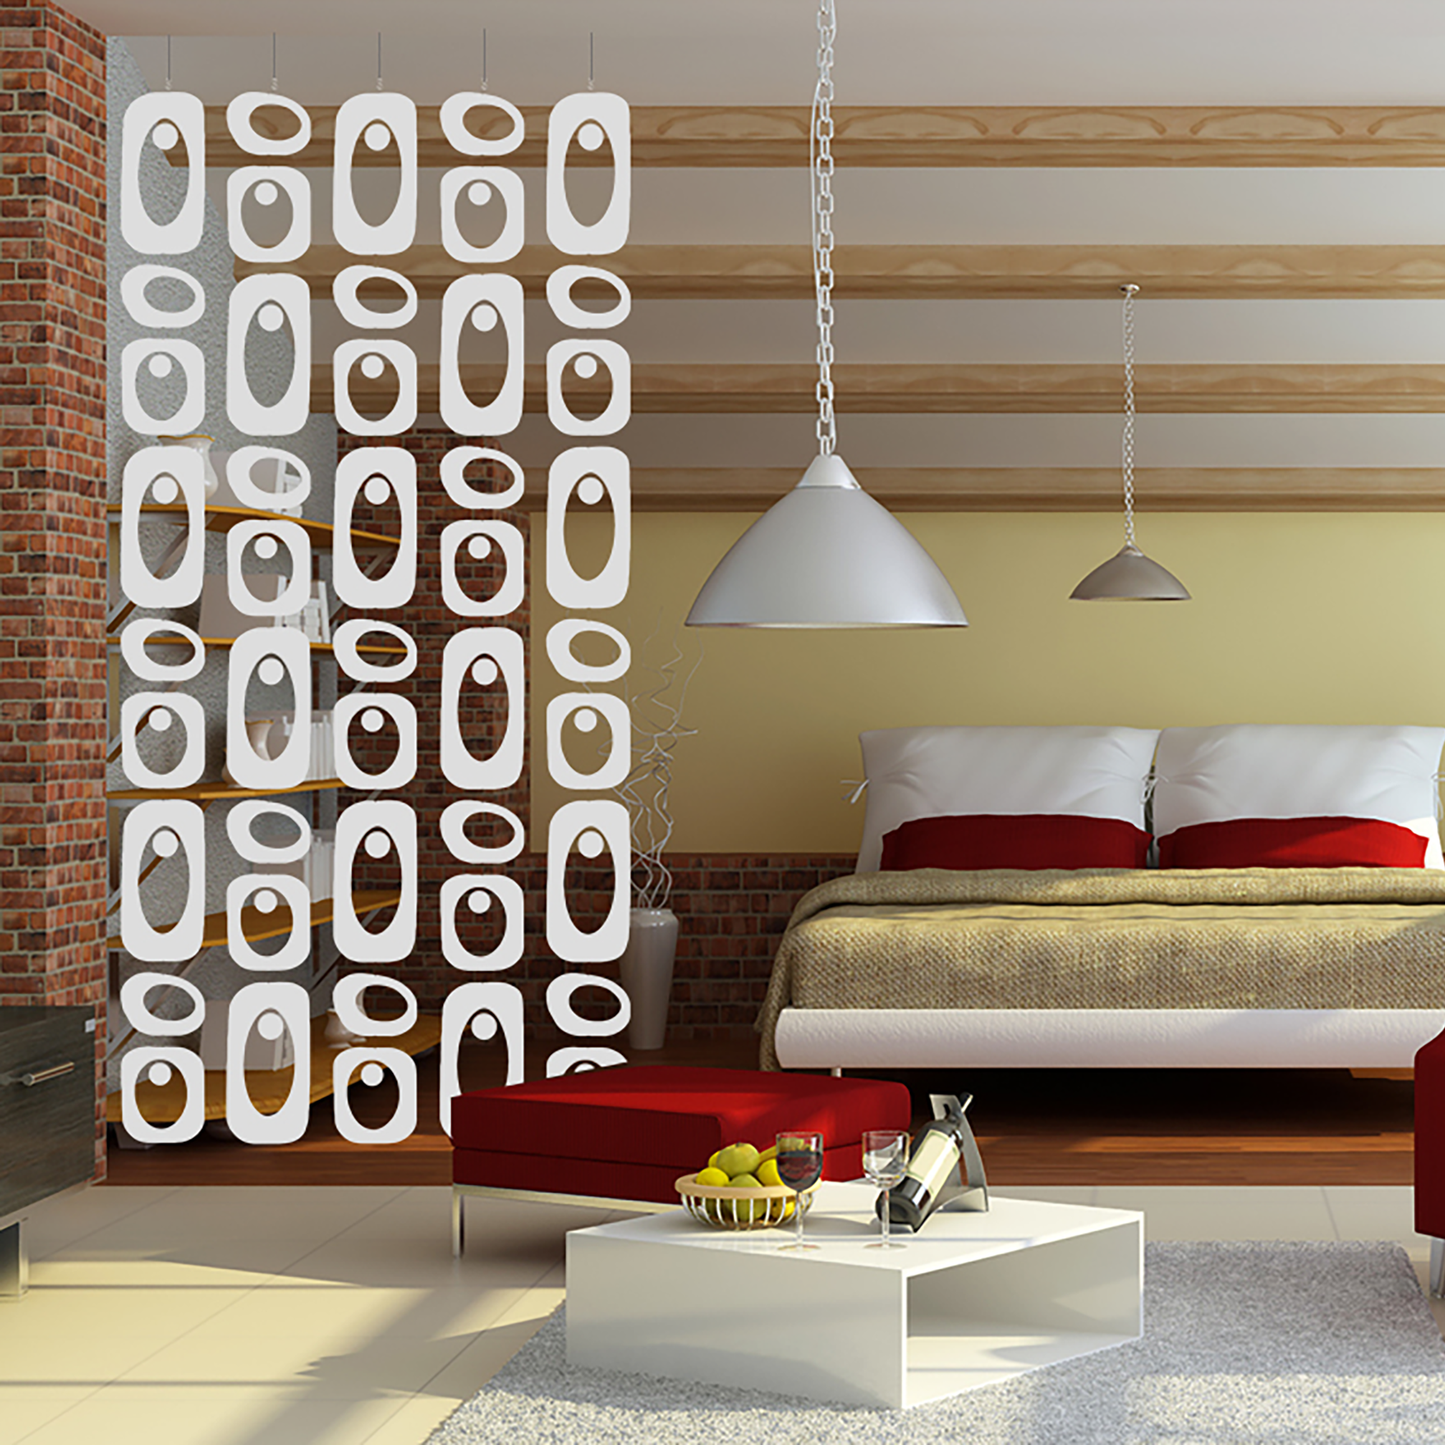 White Beatnik Party Room Divider in modern bedroom - room dividers by AtomicMobiles.com